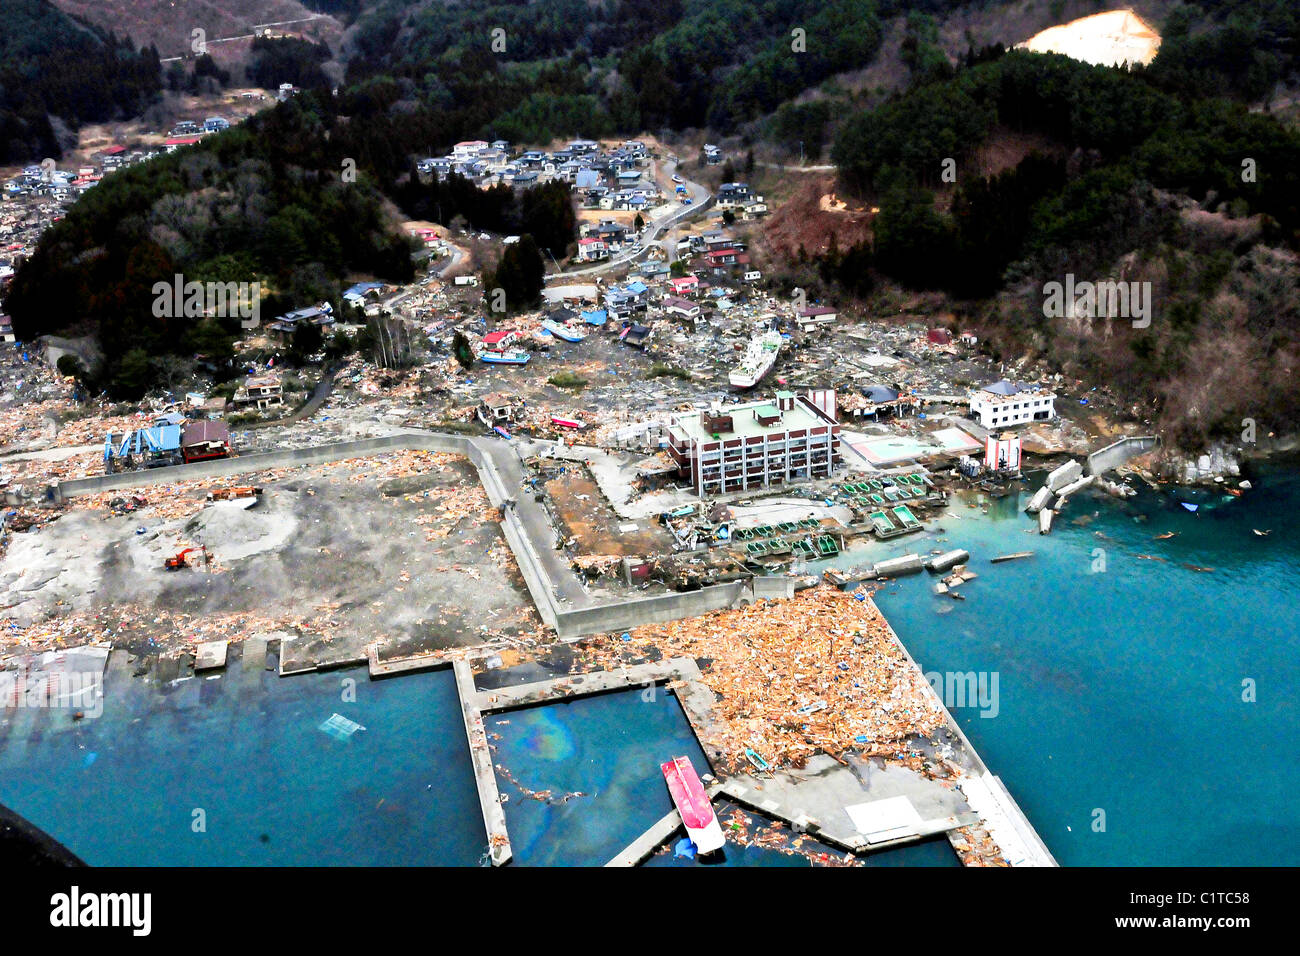 An aerial view of damage to Wakuya, Japan after a 9.0 magnitude earthquake and subsequent tsunami devastated the area. Stock Photo